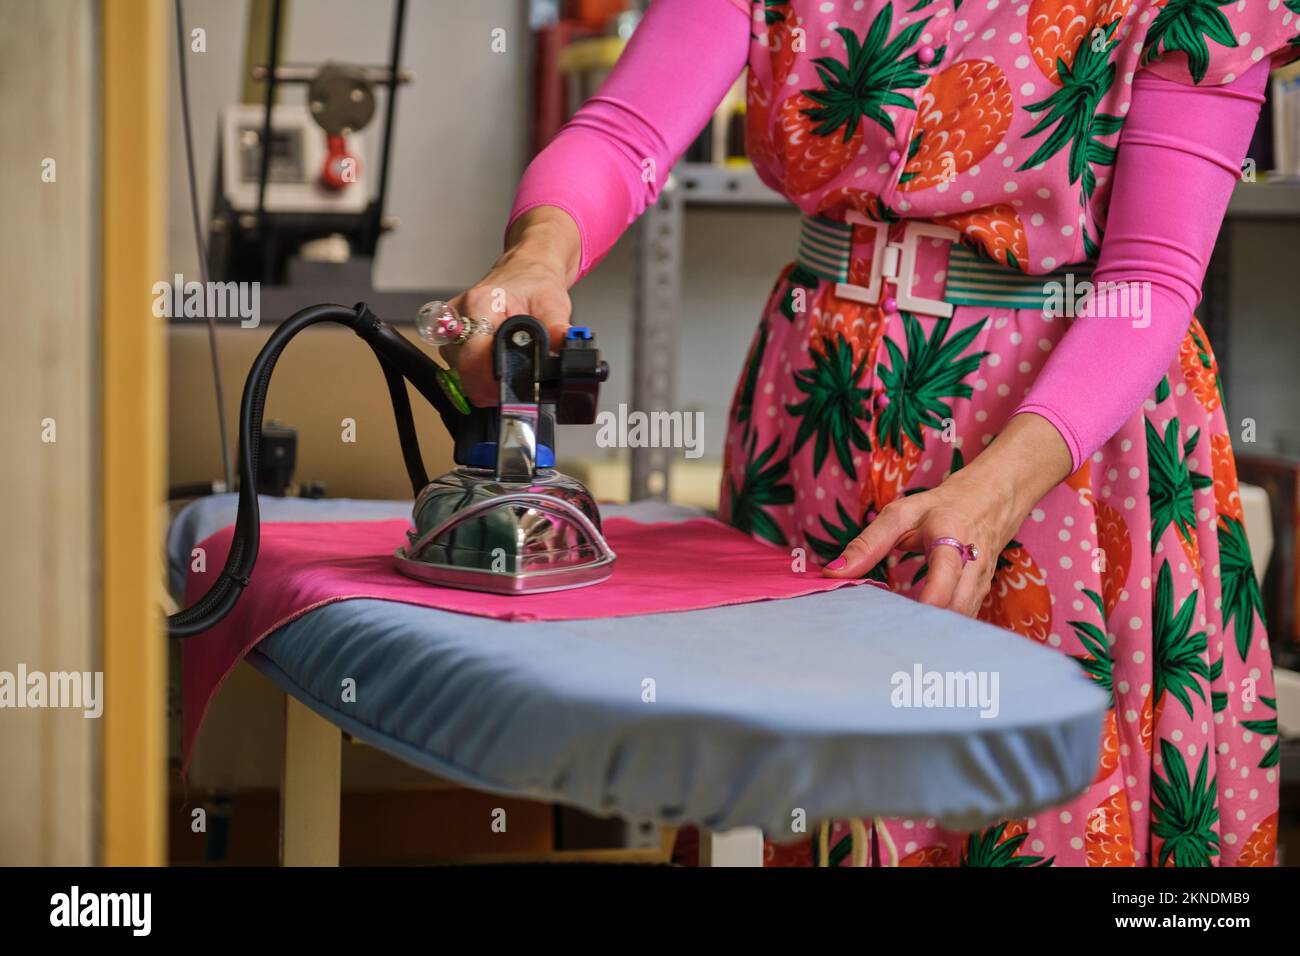 Unrecognizable dressmaker with colorfull clothes ironing fabric. Stock Photo